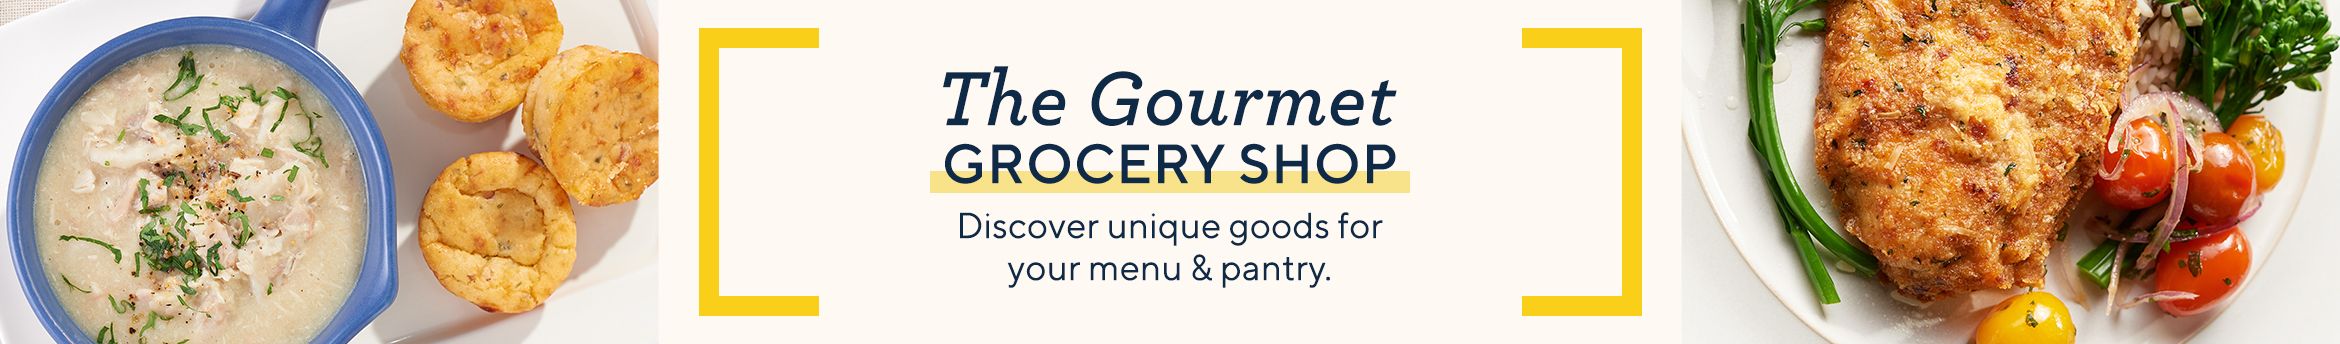 The Gourmet Grocery Shop.  Discover unique goods for your menu & pantry.